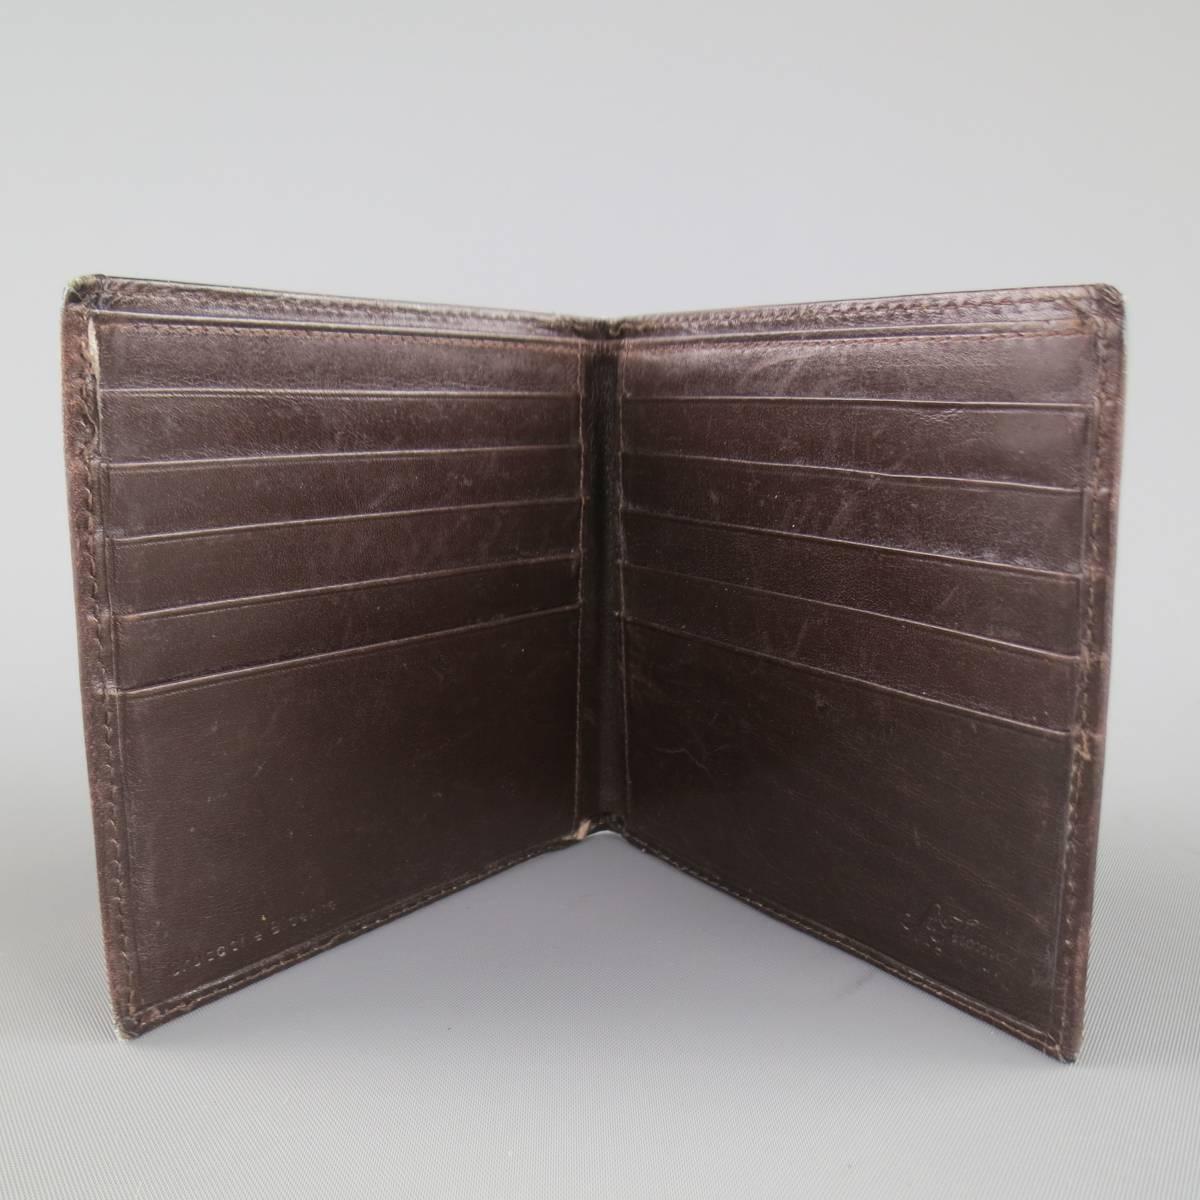 Vintage ST. THOMAS bifold wallet in a dark brown high shine crocodile leather with smooth leather interior. Wear throughout. With dust bag. Made in Italy.
 
Fair Pre-Owned Condition.
 
4 x 4 in.


Web ID: 82309 
